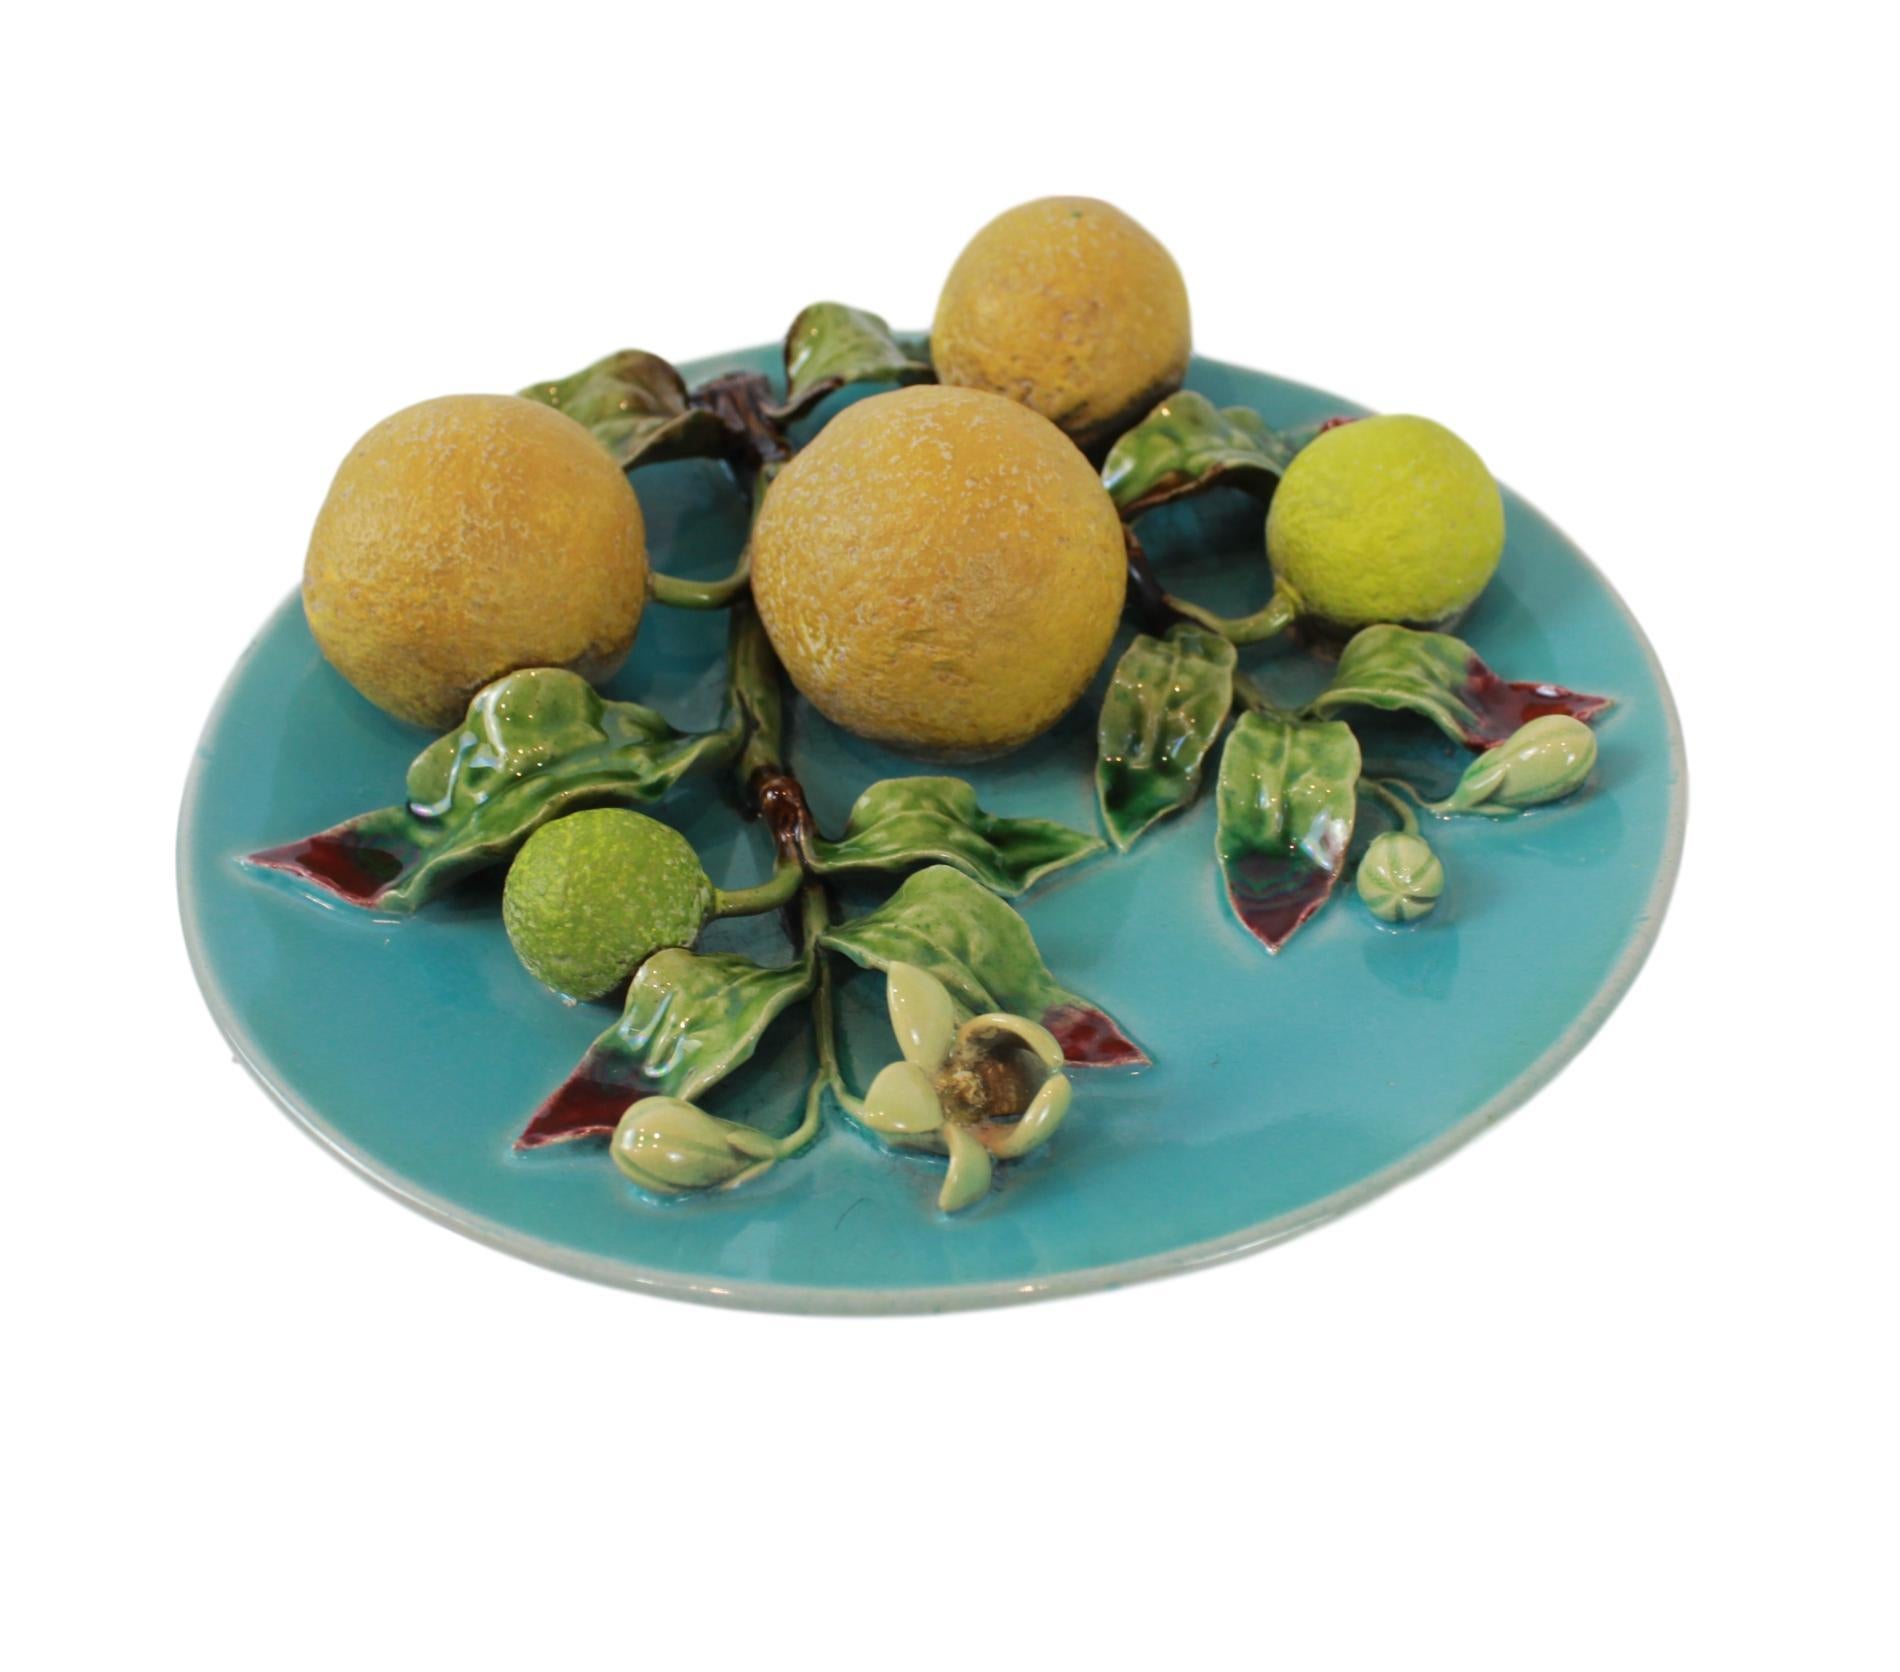 Menton French Majolica (Barbotine) Trompe L'oeil Wall Plaque on a turquoise ground with oranges molded in high relief, circa 1880, with impressed mark for Eugene Perret-Gentil, diameter 8 inches.
Generally referred to as 